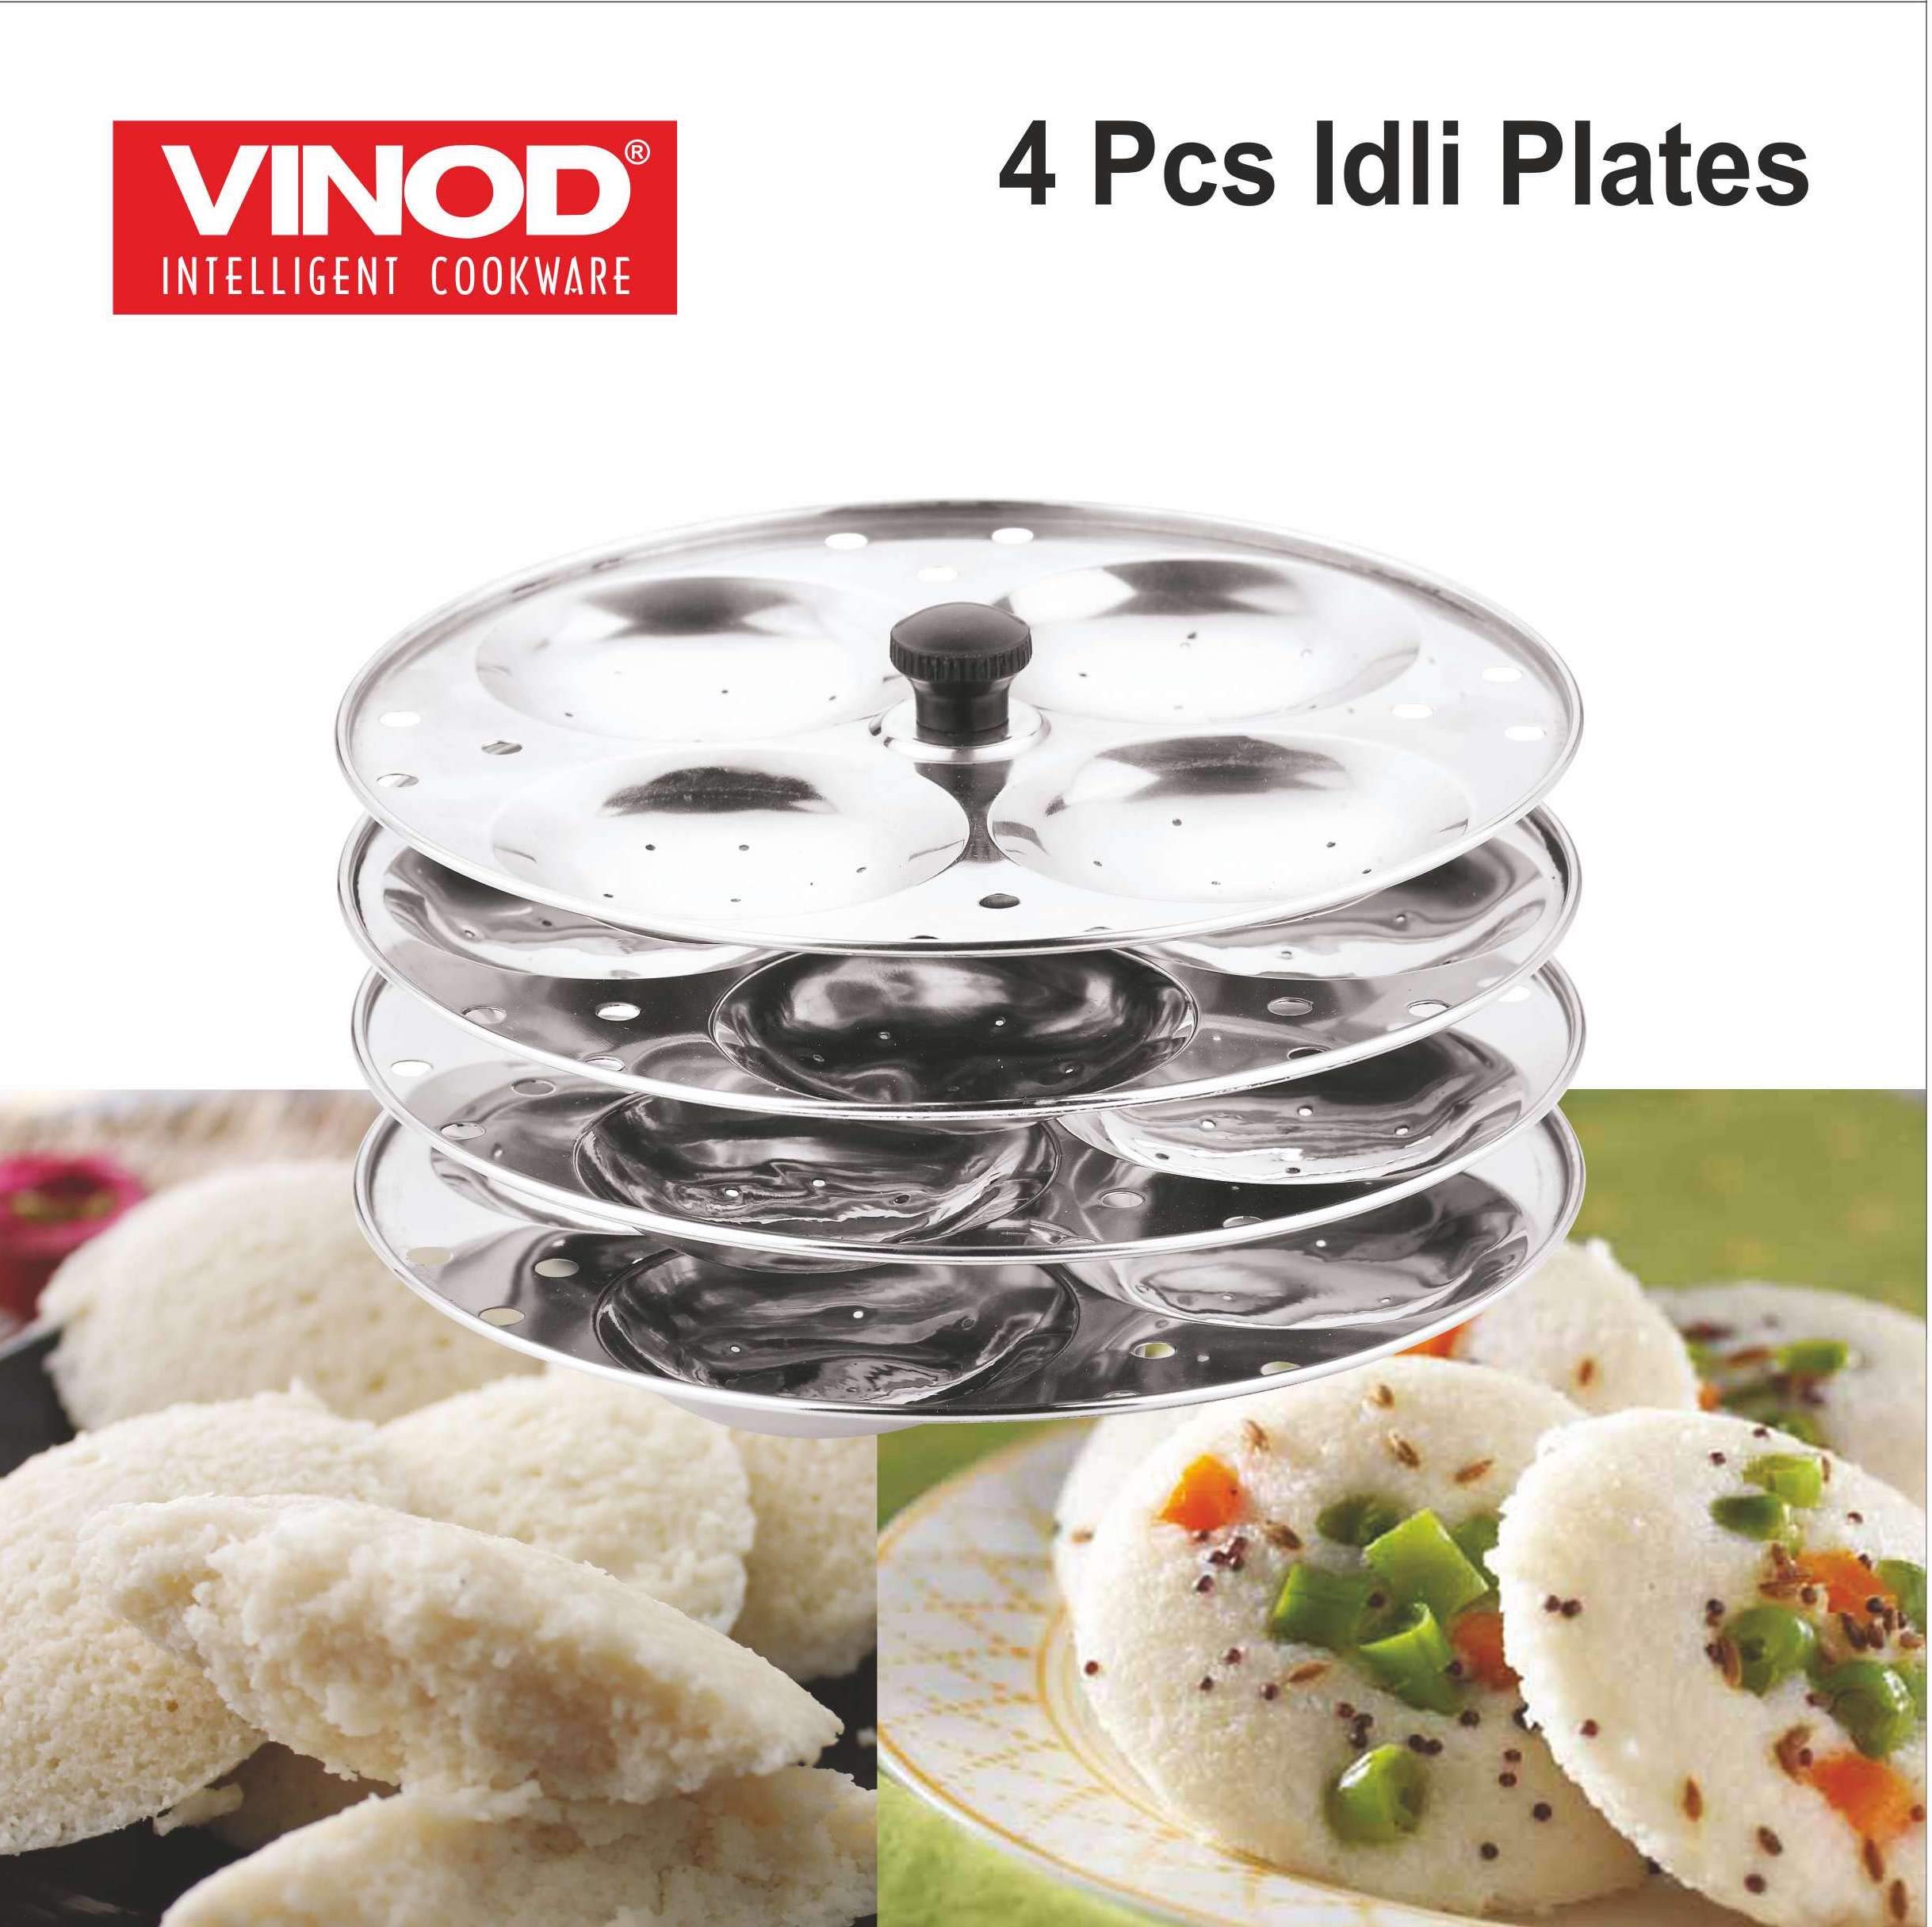 Vinod Professional Idli Stand – 4 Tier Stand – Makes up to 16 Idlis – Easy Cleaning – Stainless Steel Body - Suitable For Indian Cooking – Food Grade Idli Plates For Cooker, Electric Pot, Insta Pot